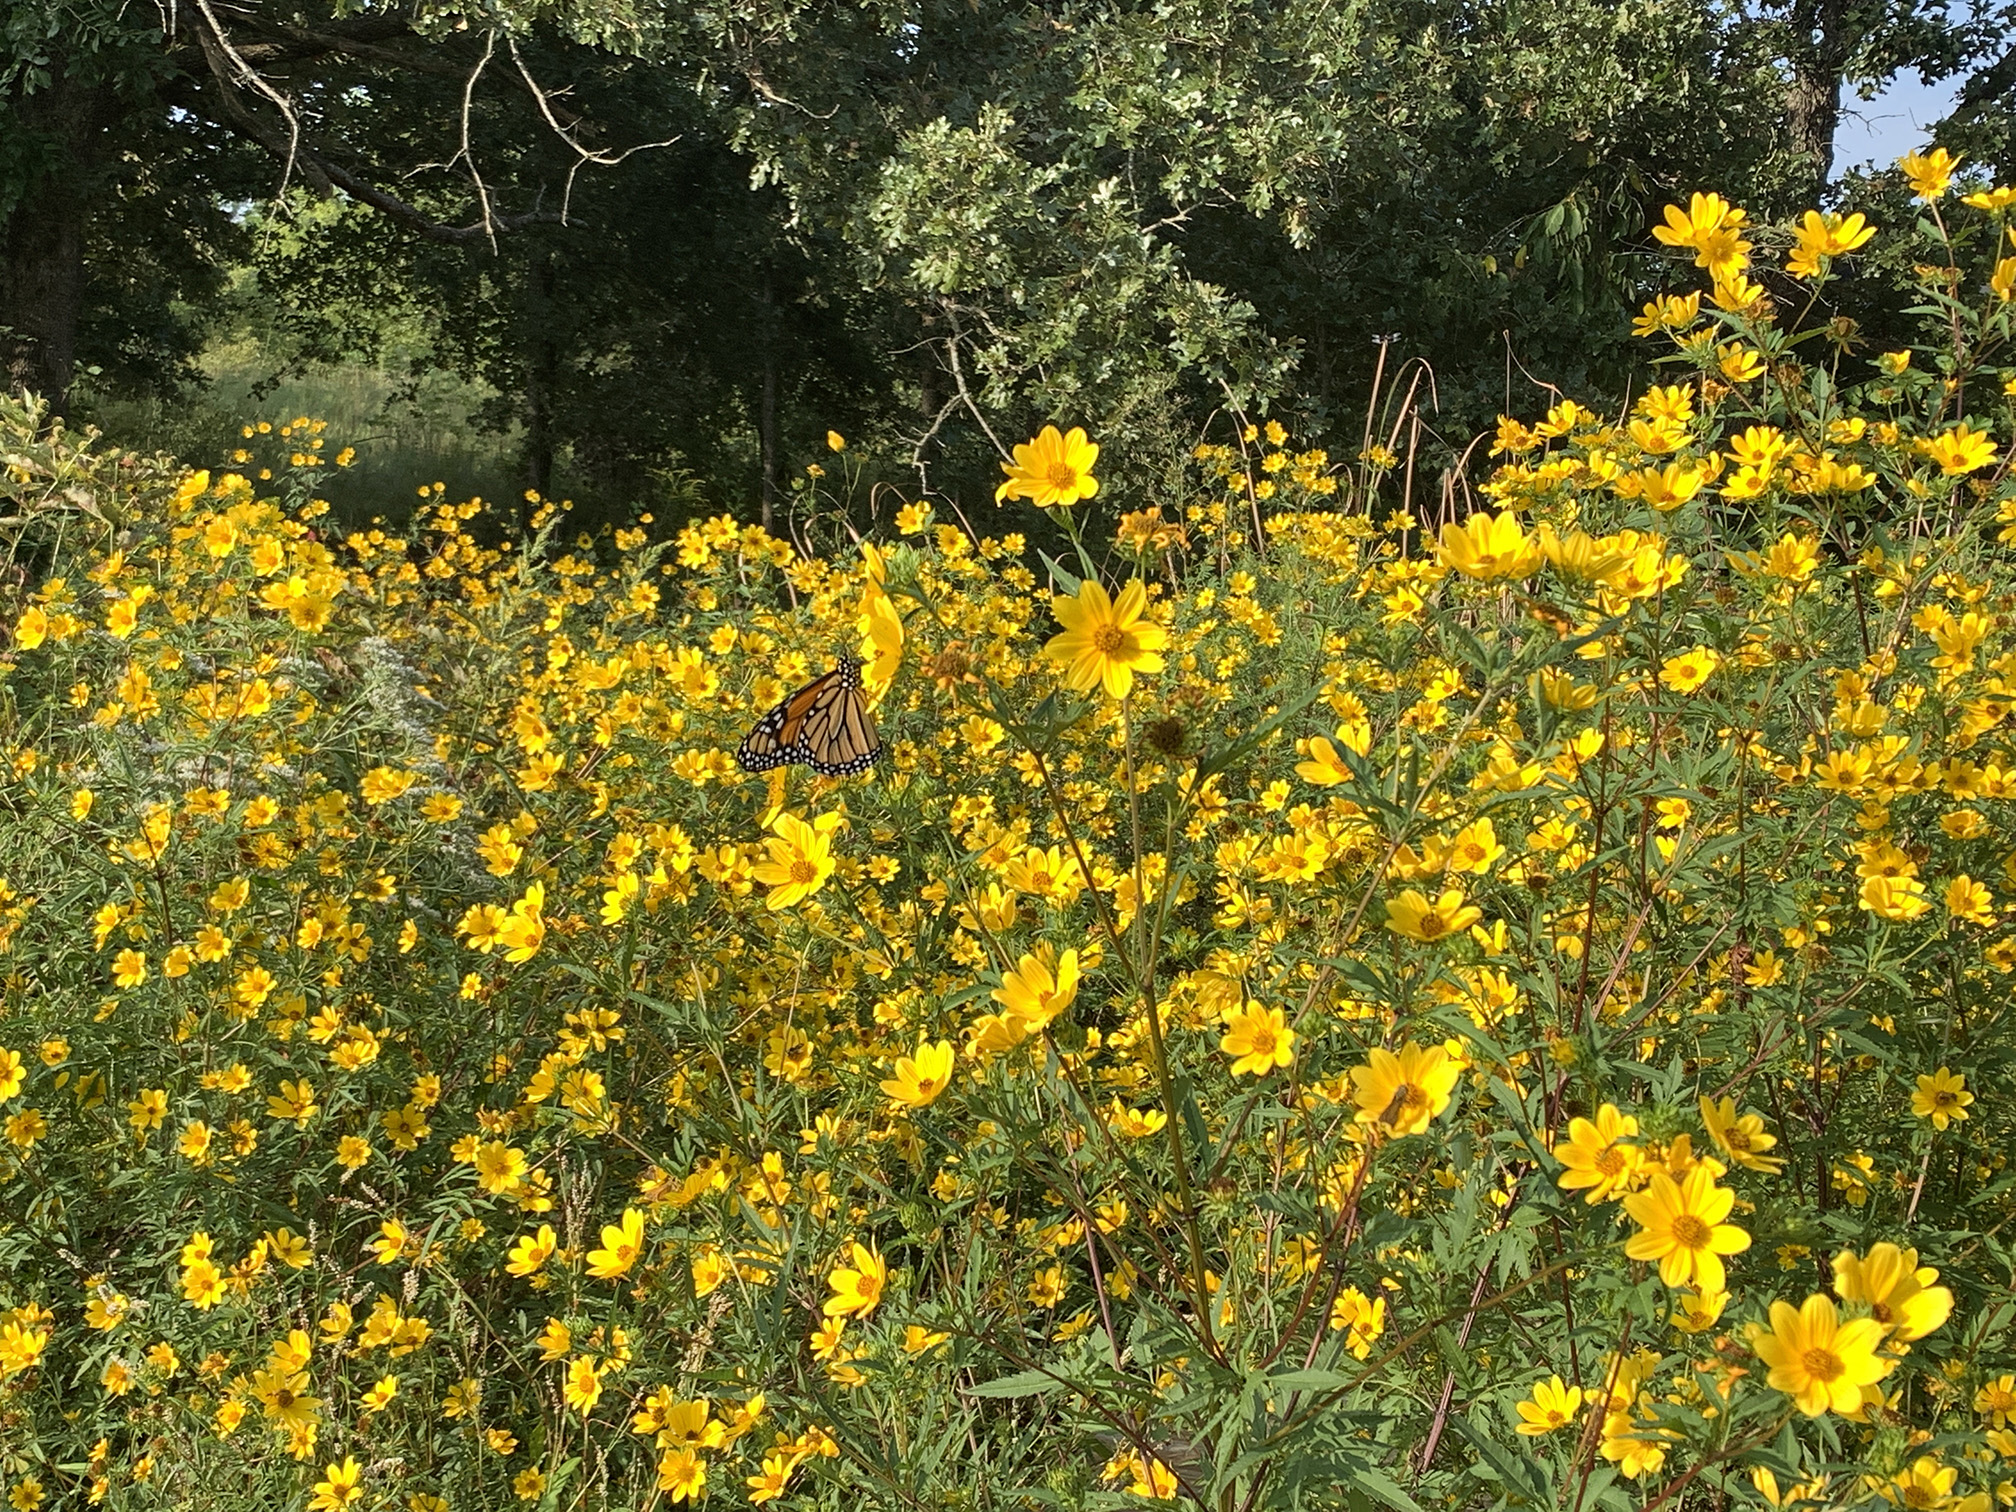 A large patch of yellow flowers growing in front of trees. The flowers are several feet tall, with green leaves, brown stems, and flowers that have bright yellow petals in a ring around a darker yellow center. An orange-and-black monarch butterfly hangs from one of the flower to drink nectar.